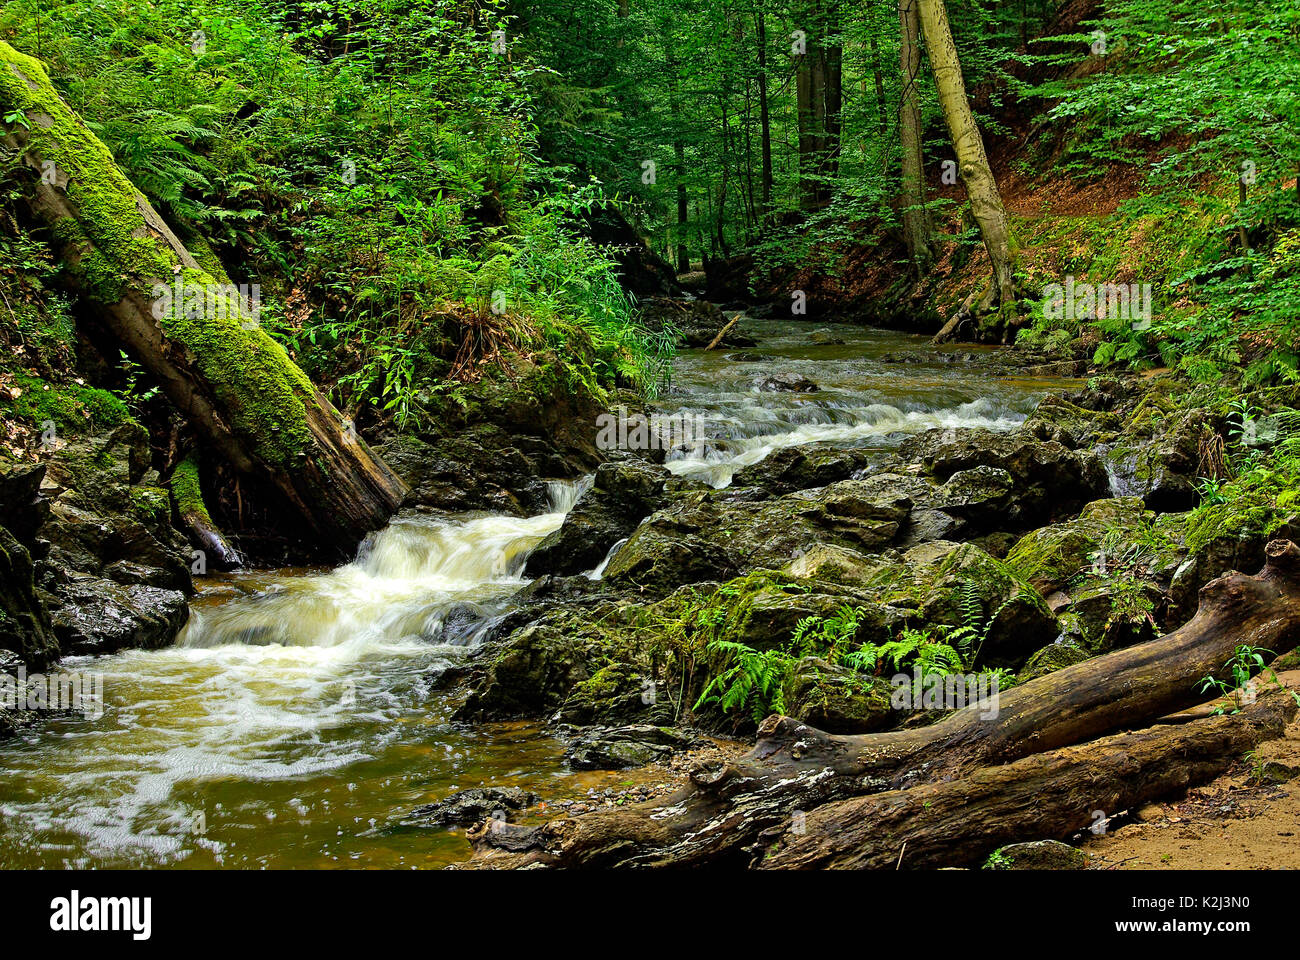 Small forest stream, the Priessnitz creek in the Dresdner Heide Forest, Dresden-Klotzsche, Saxony, Germany. Stock Photo